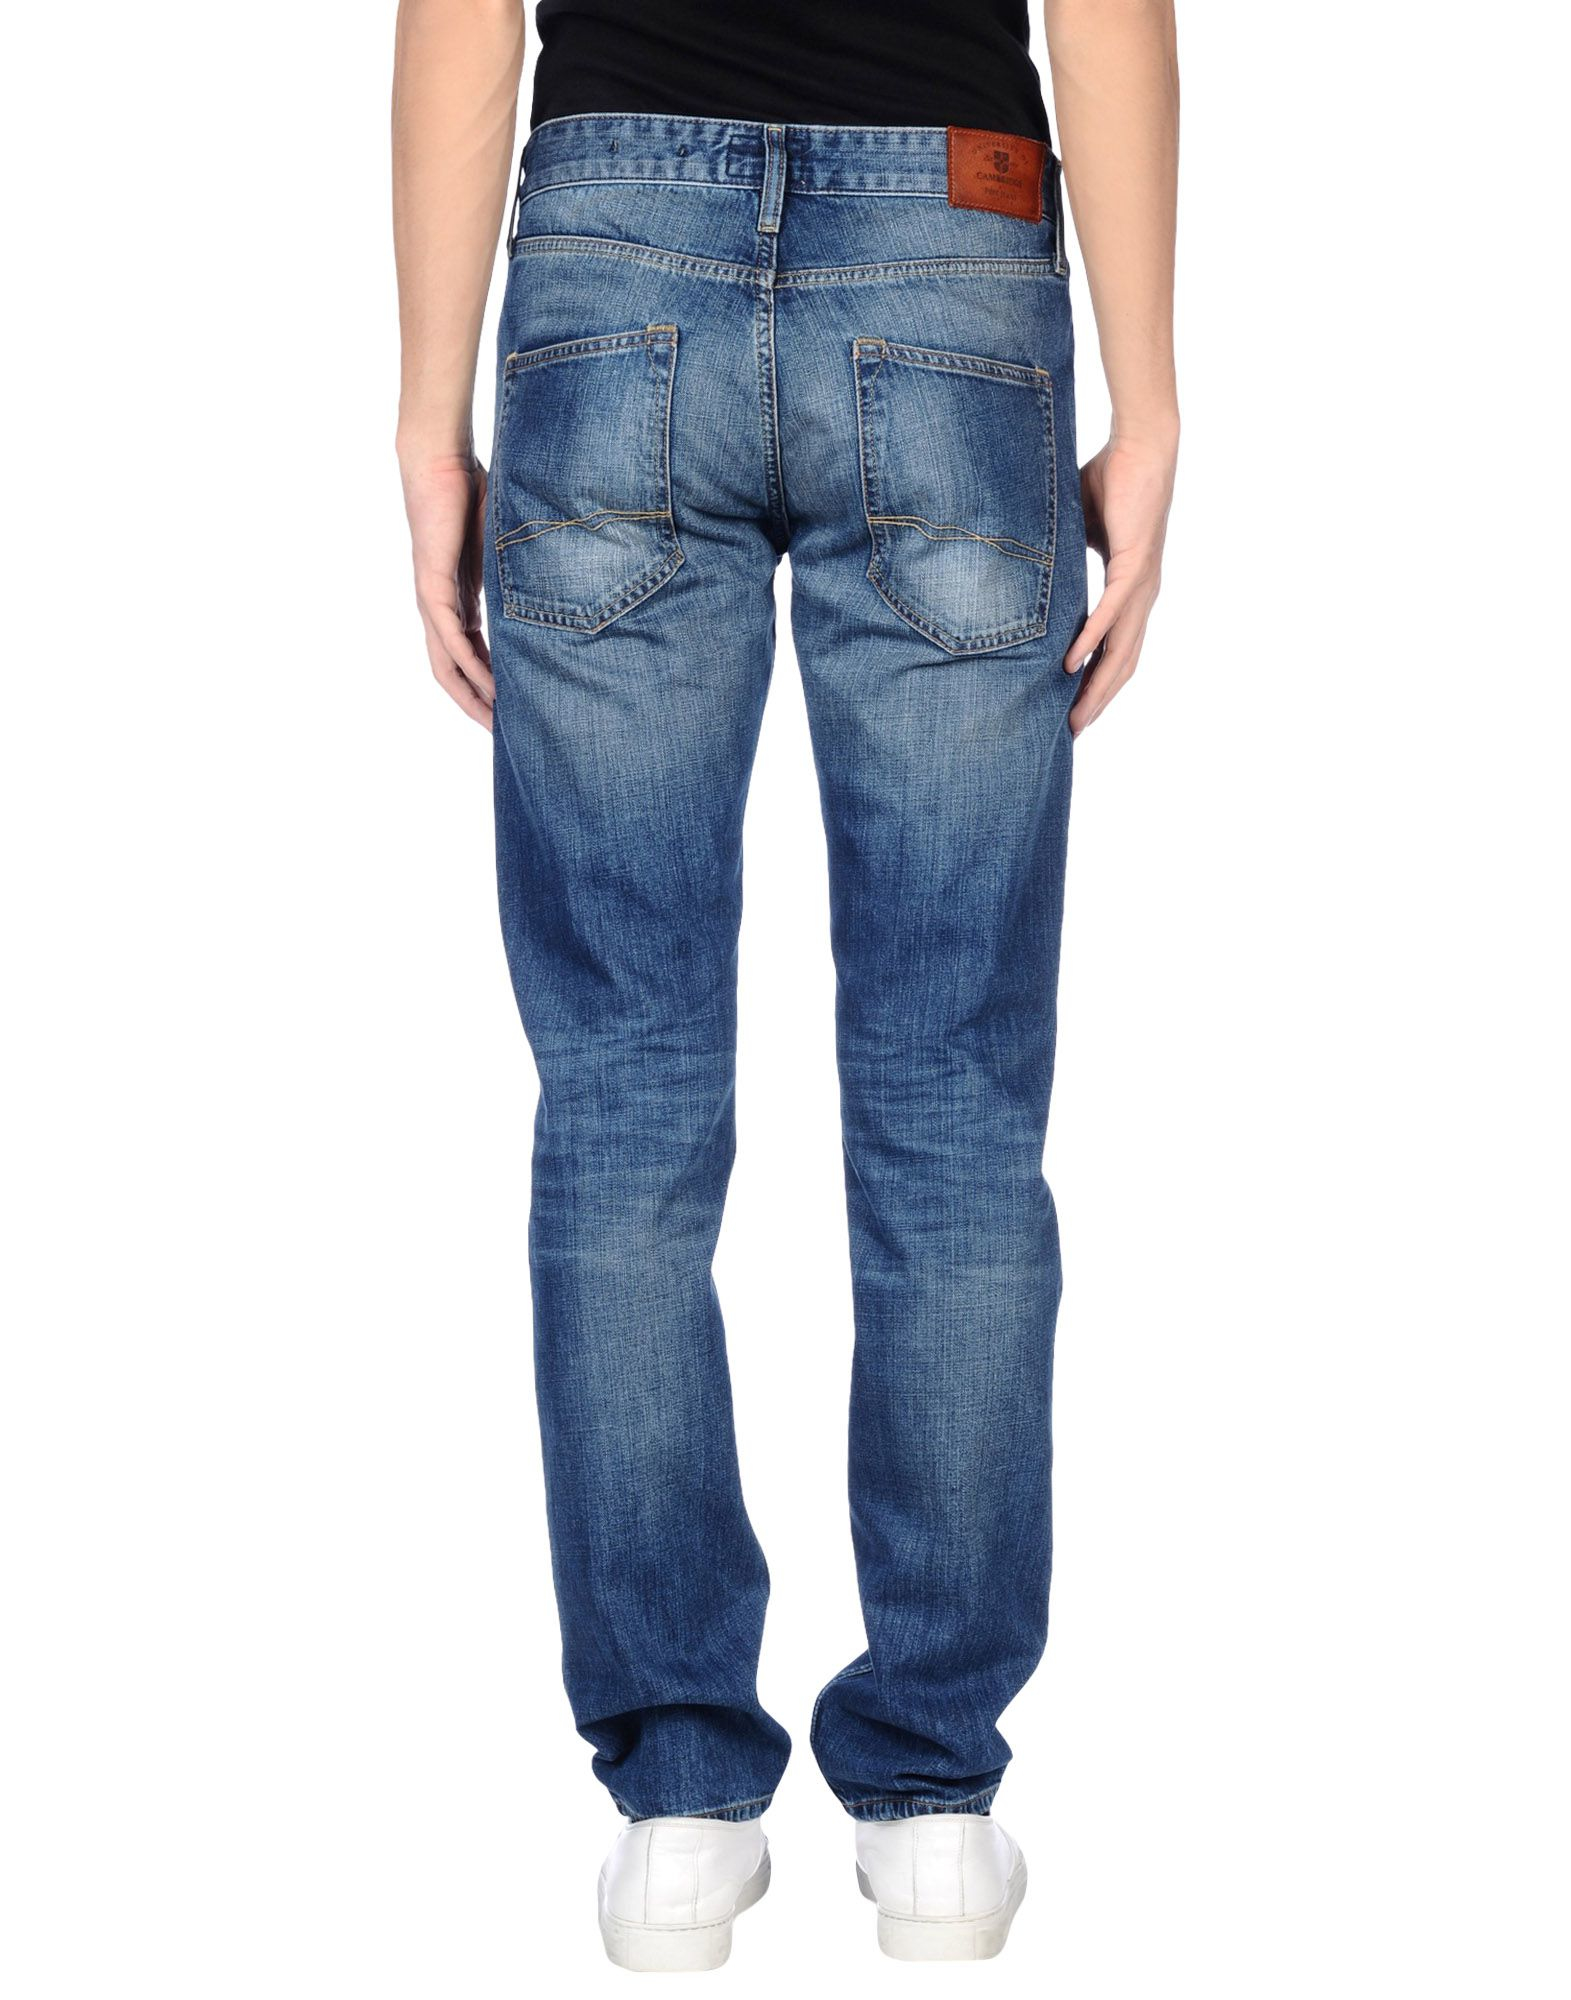 Lyst - Pepe Jeans Denim Trousers in Blue for Men